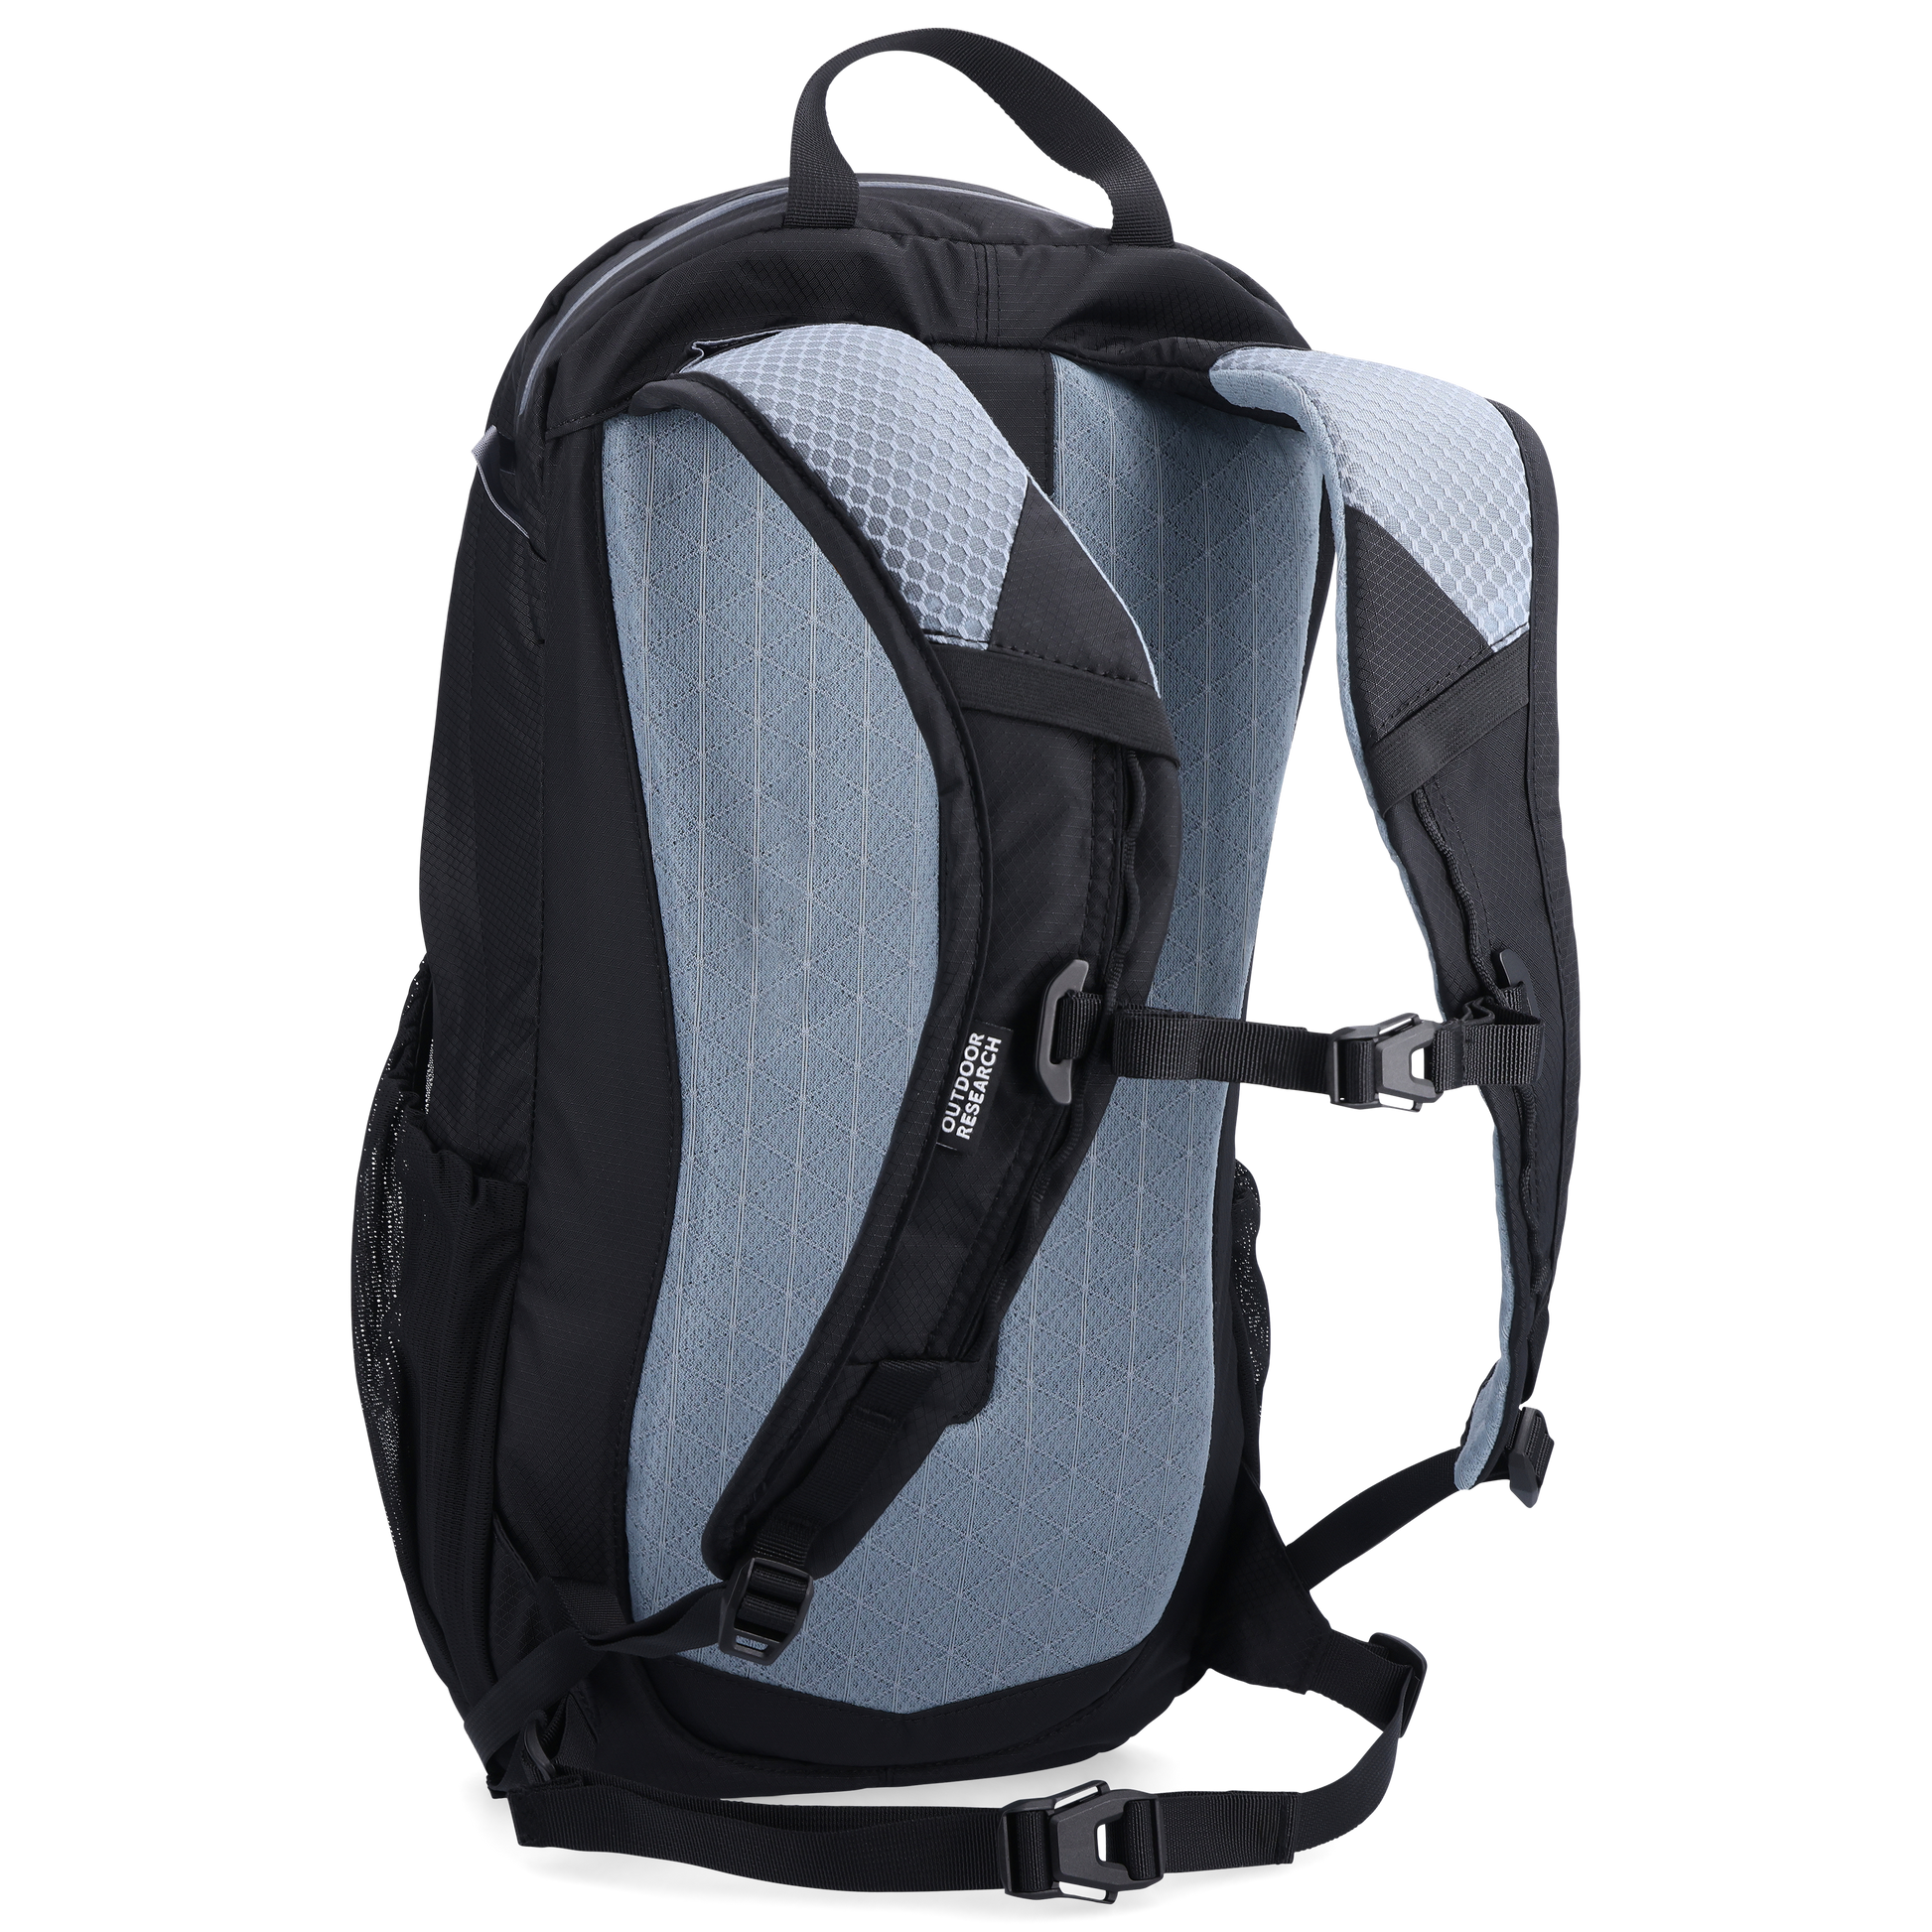 Adrenaline Day Pack 20L | Outdoor Research